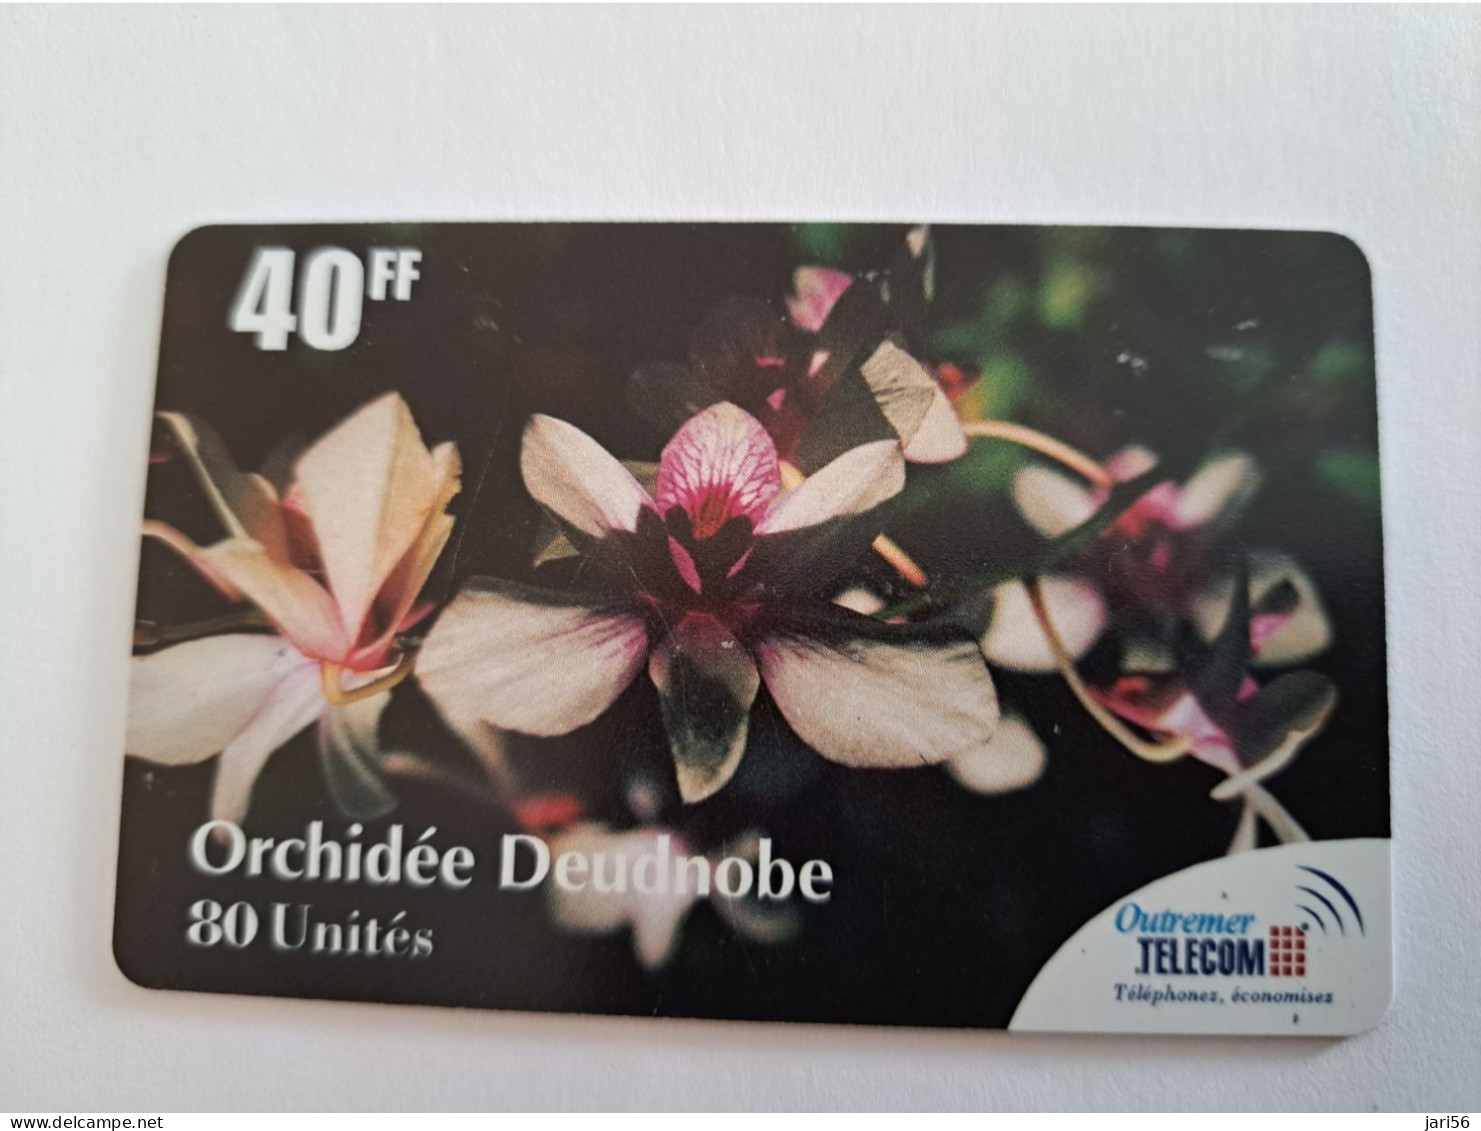 ST MARTIN  / OUTREMER/ FLOWERS/ ORCHIDEE DEUDNOBE  / 40 FF/ 80  UNITS / ANTF-OT52  FINE USED CARD    ** 13918 ** - Antillen (Frans)